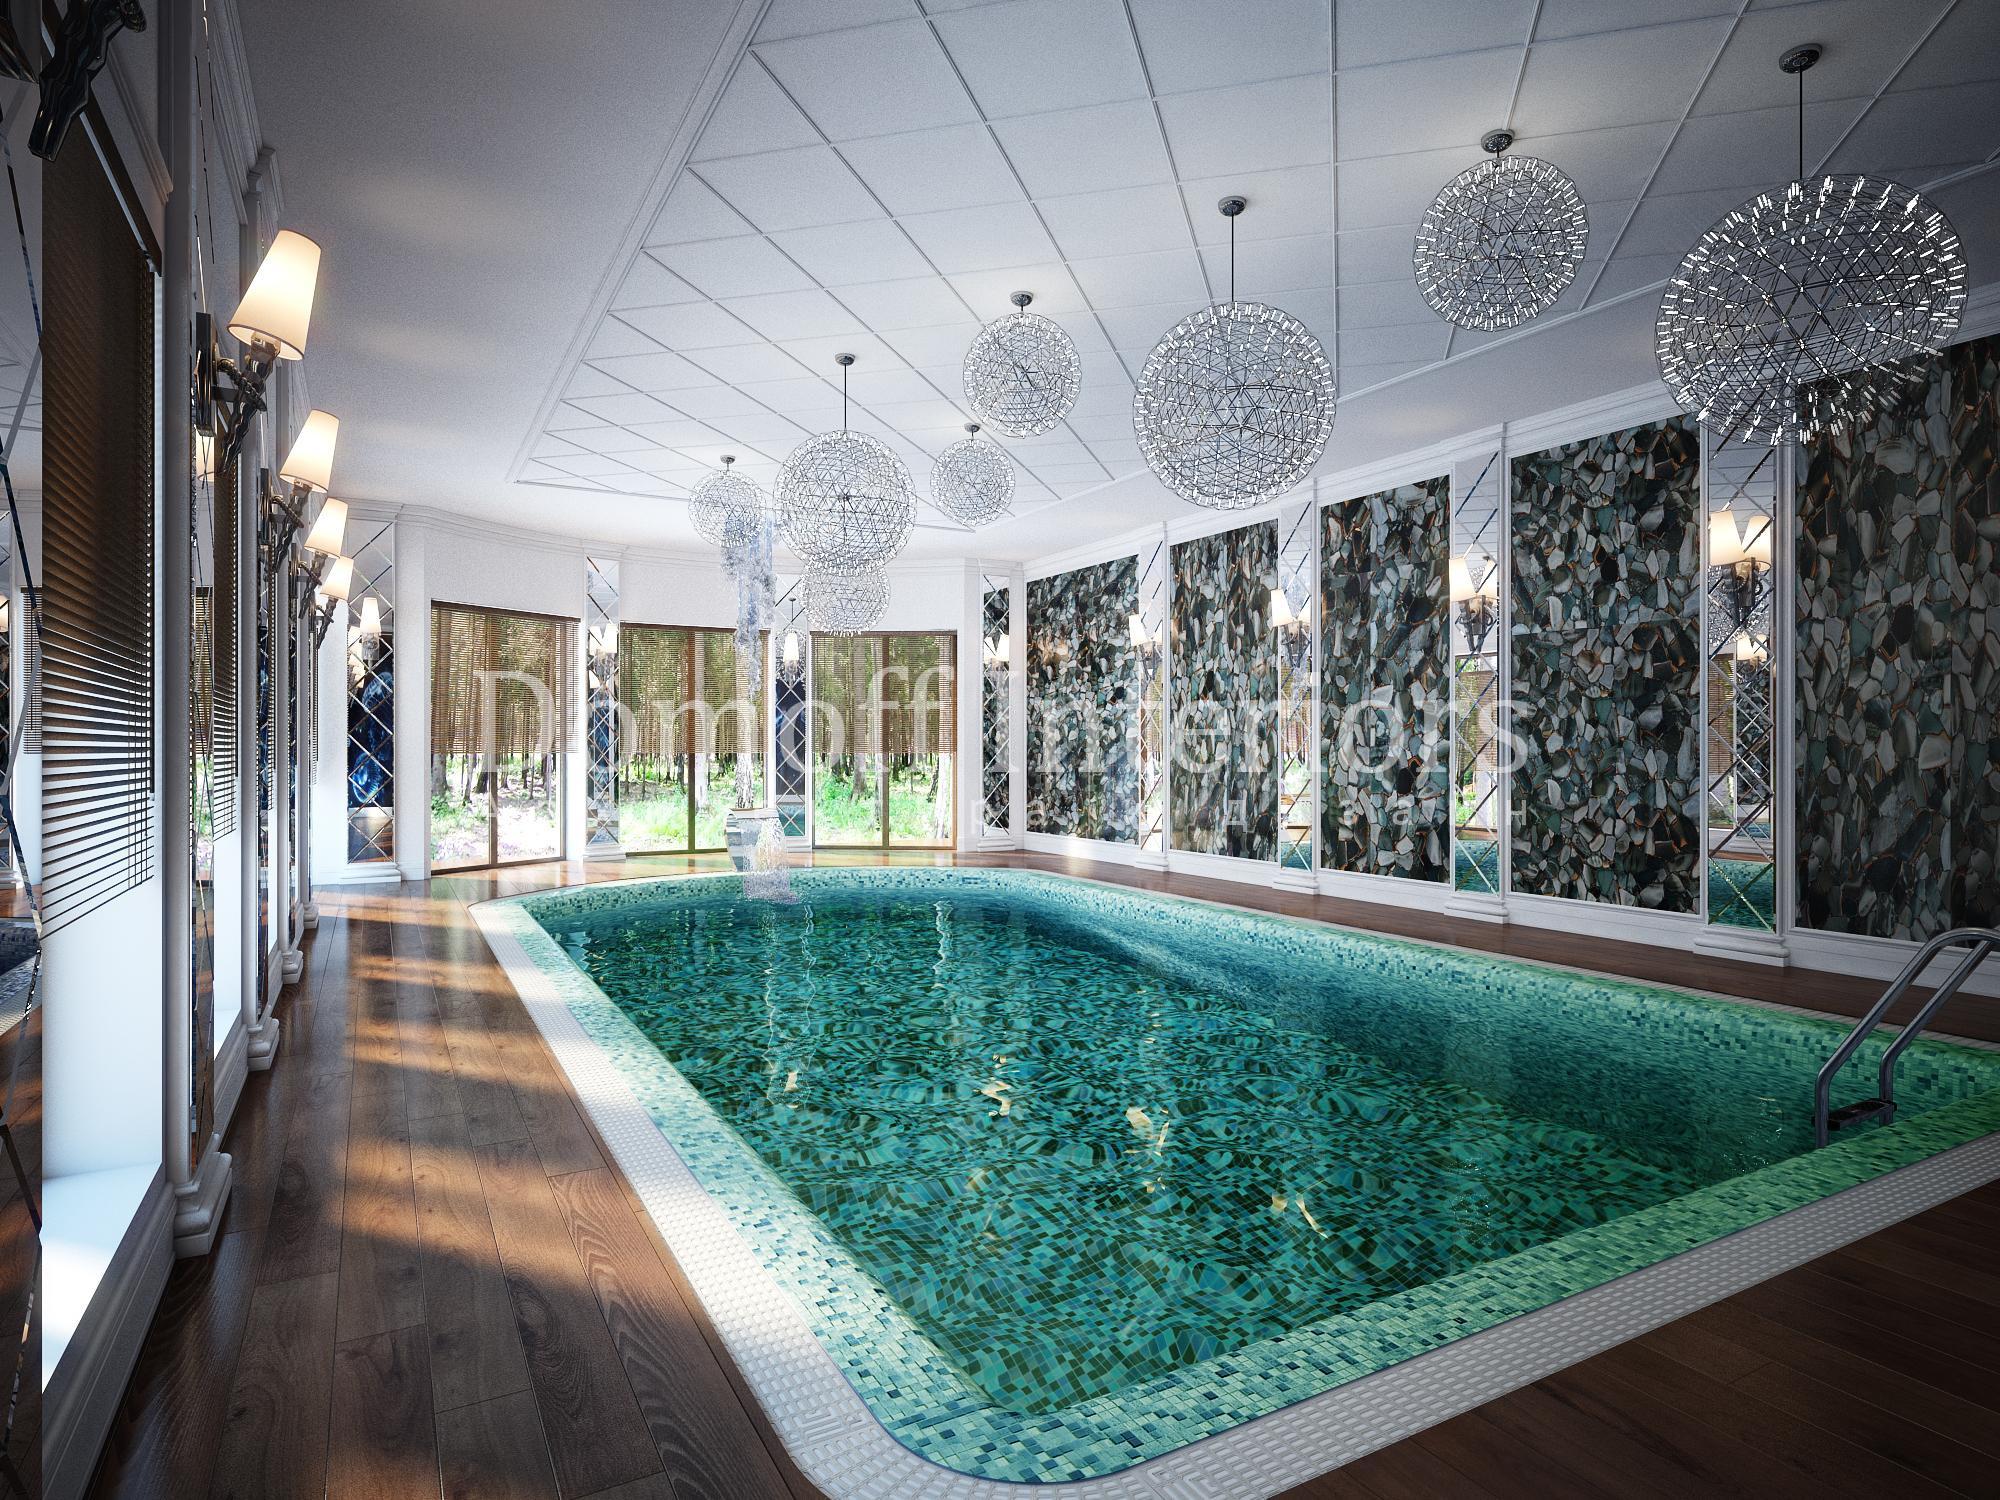 Swimming pool made in the style of Contemporary classics